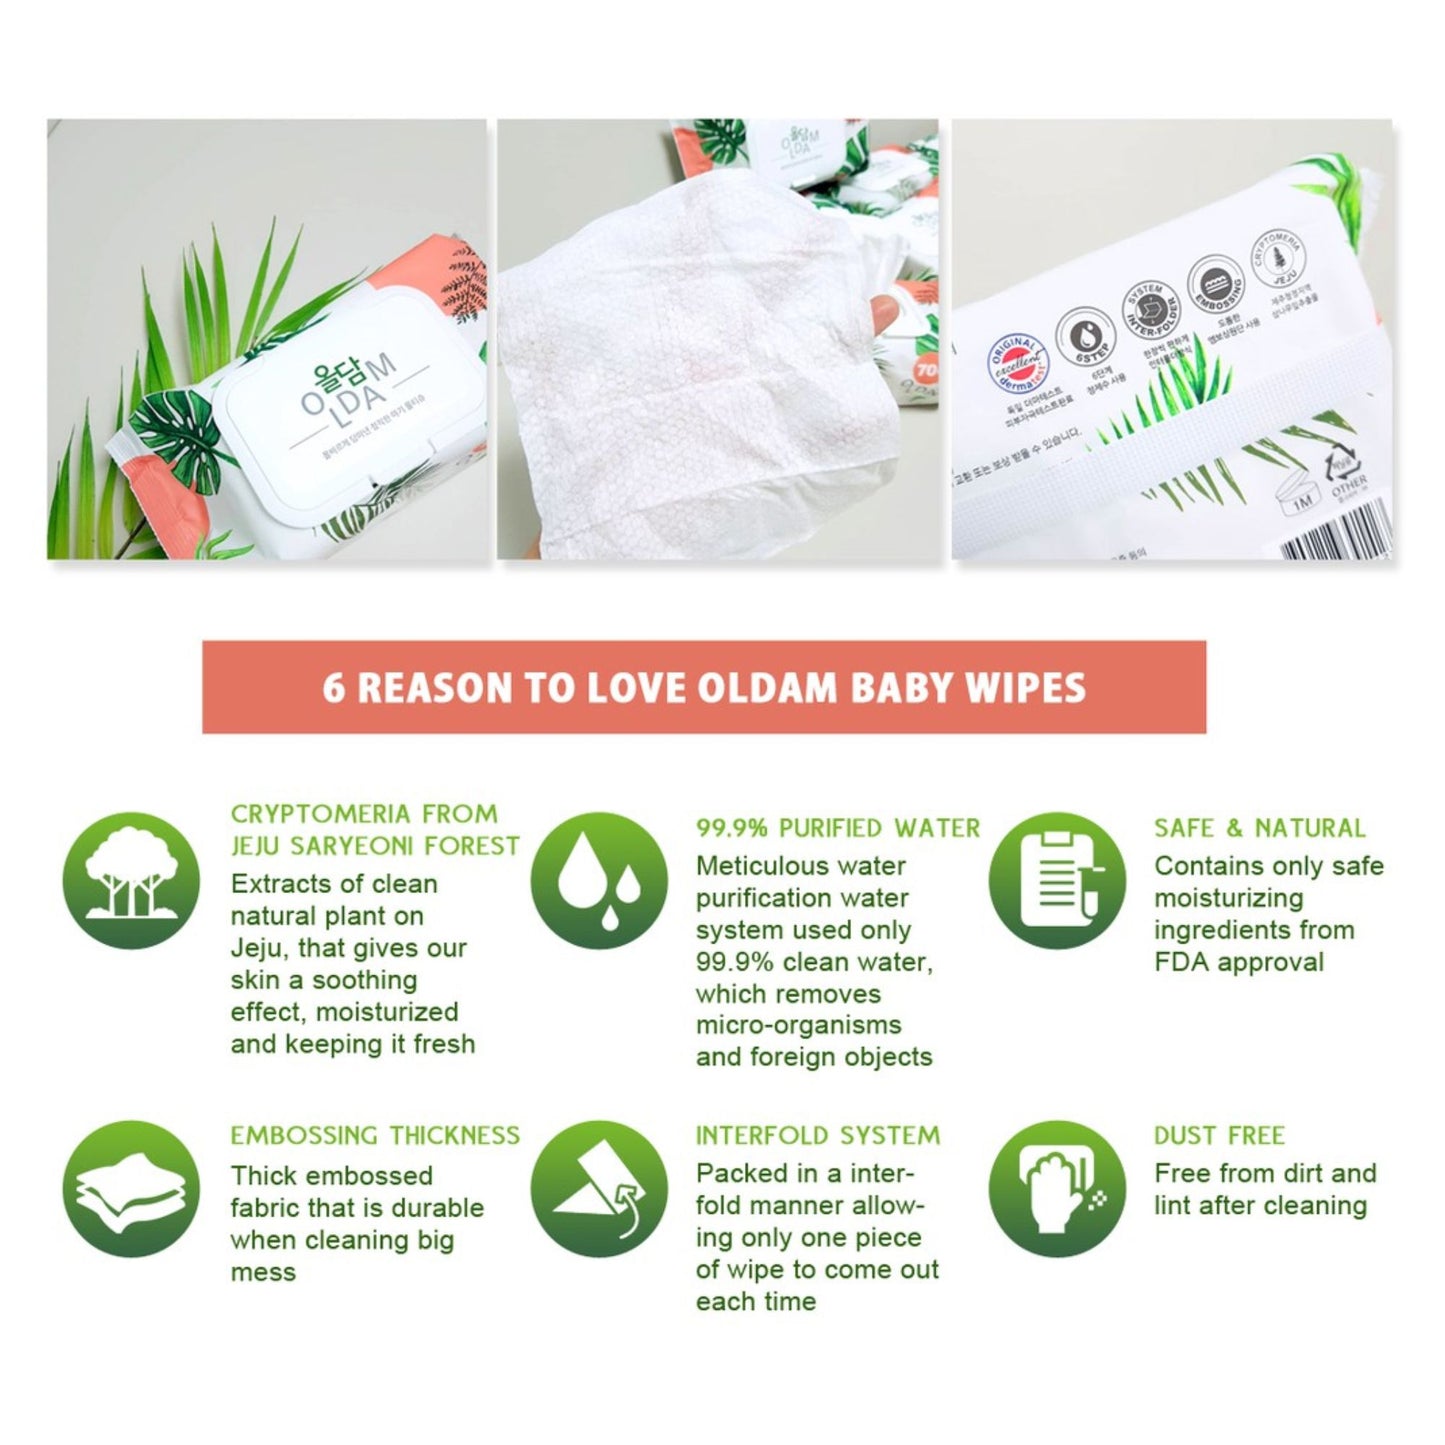 Dinky Oldam 올담 Korean Baby Wipes (8 Packs x 70pcs) - Safe For Baby. Soft & Sensitive, Thick